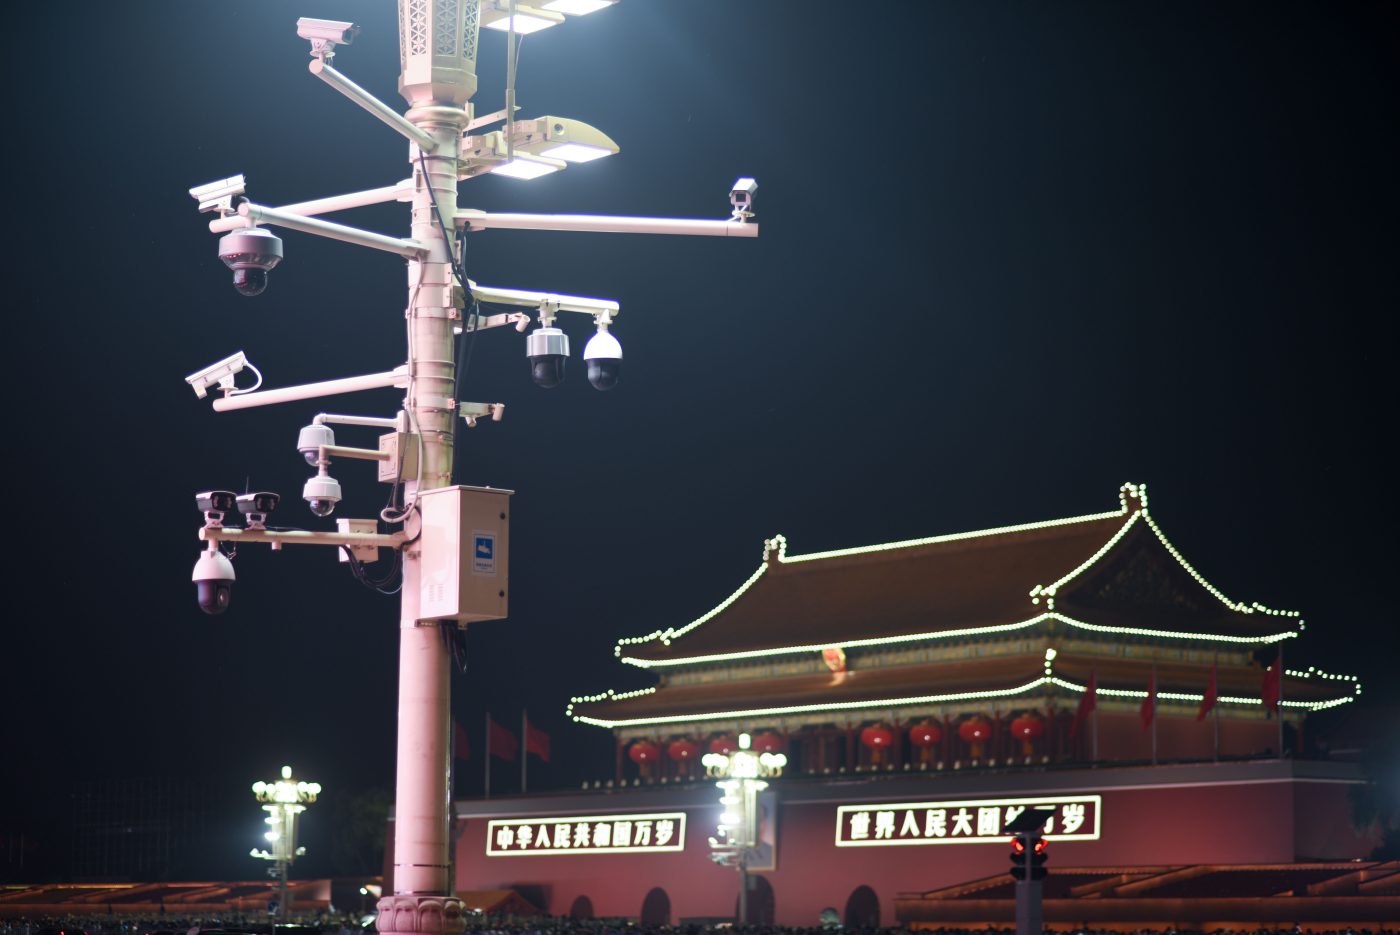 Photo: Several video surveillance cameras are visible on masts located on Tiananmen Square. China?s number of surveillance cameras is expected to rise to over 560 million cameras by 2021, according to a Wall Street Journal report published in late 2019. October 03, 2019 - Beijing, China. Credit: Mehdi Chebil / Hans Lucas via Reuters Connect.